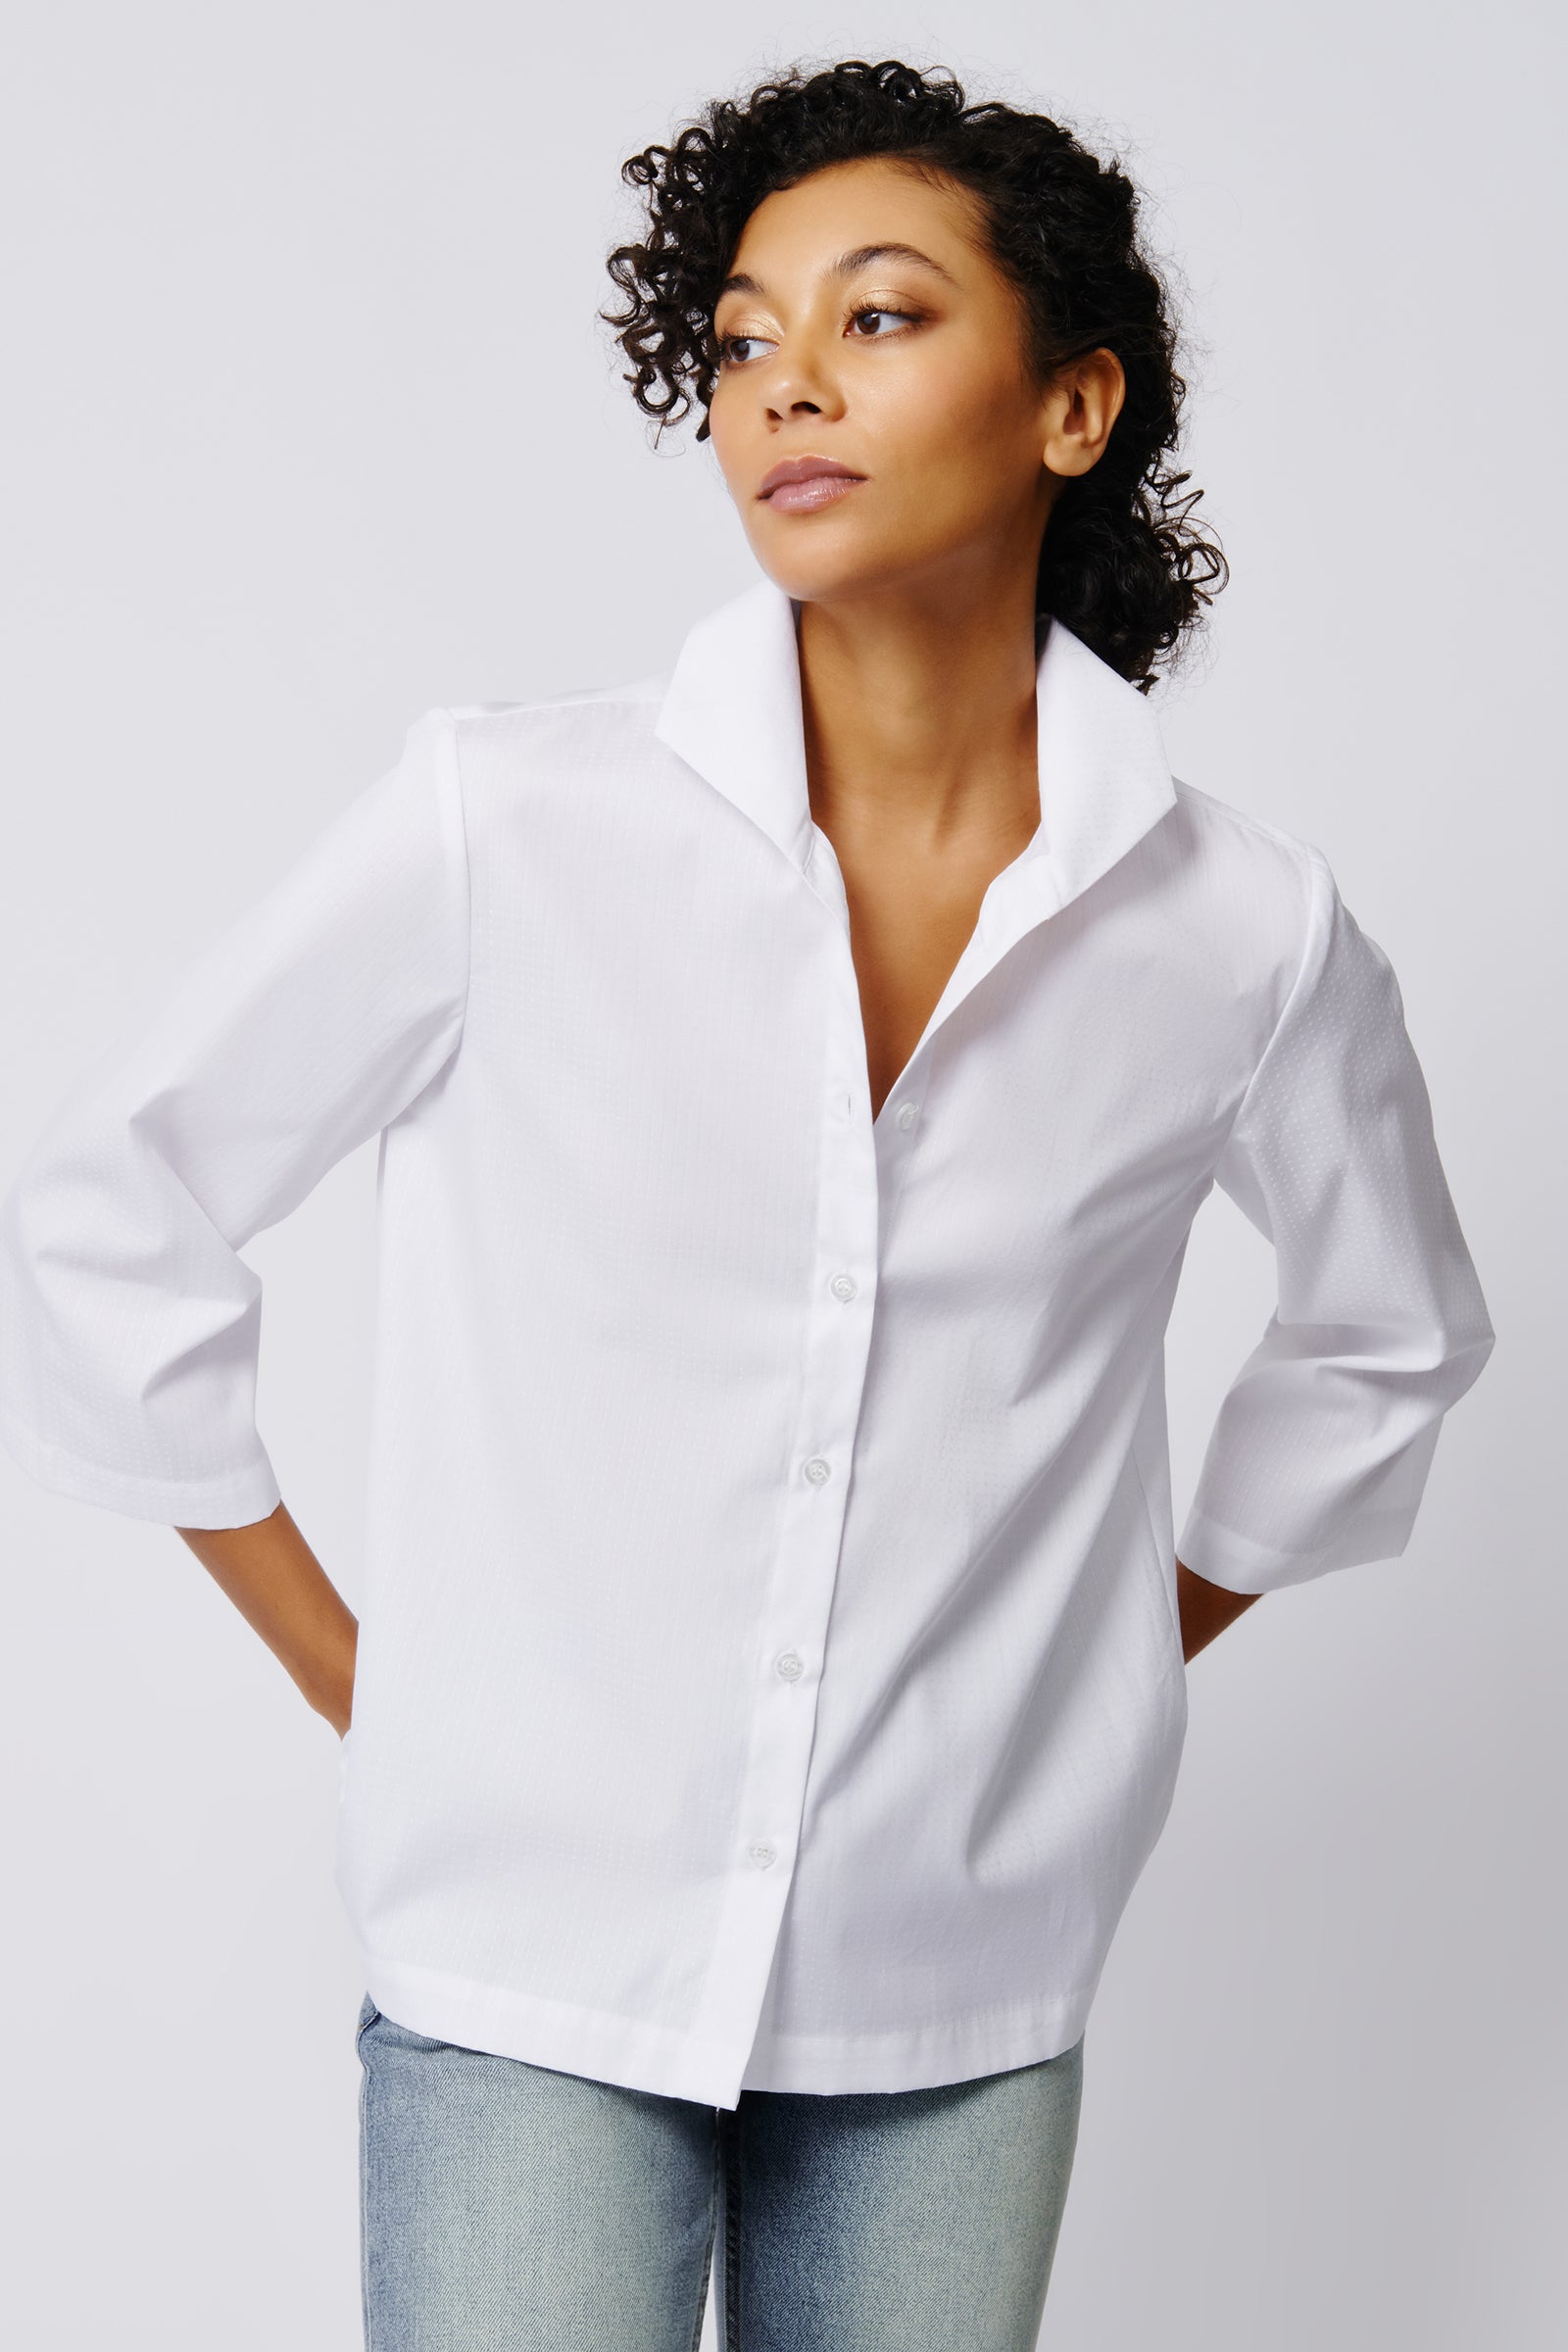 Kal Rieman 3/4 Sleeve Ginna in White Ribbon on Model Front View Crop 2